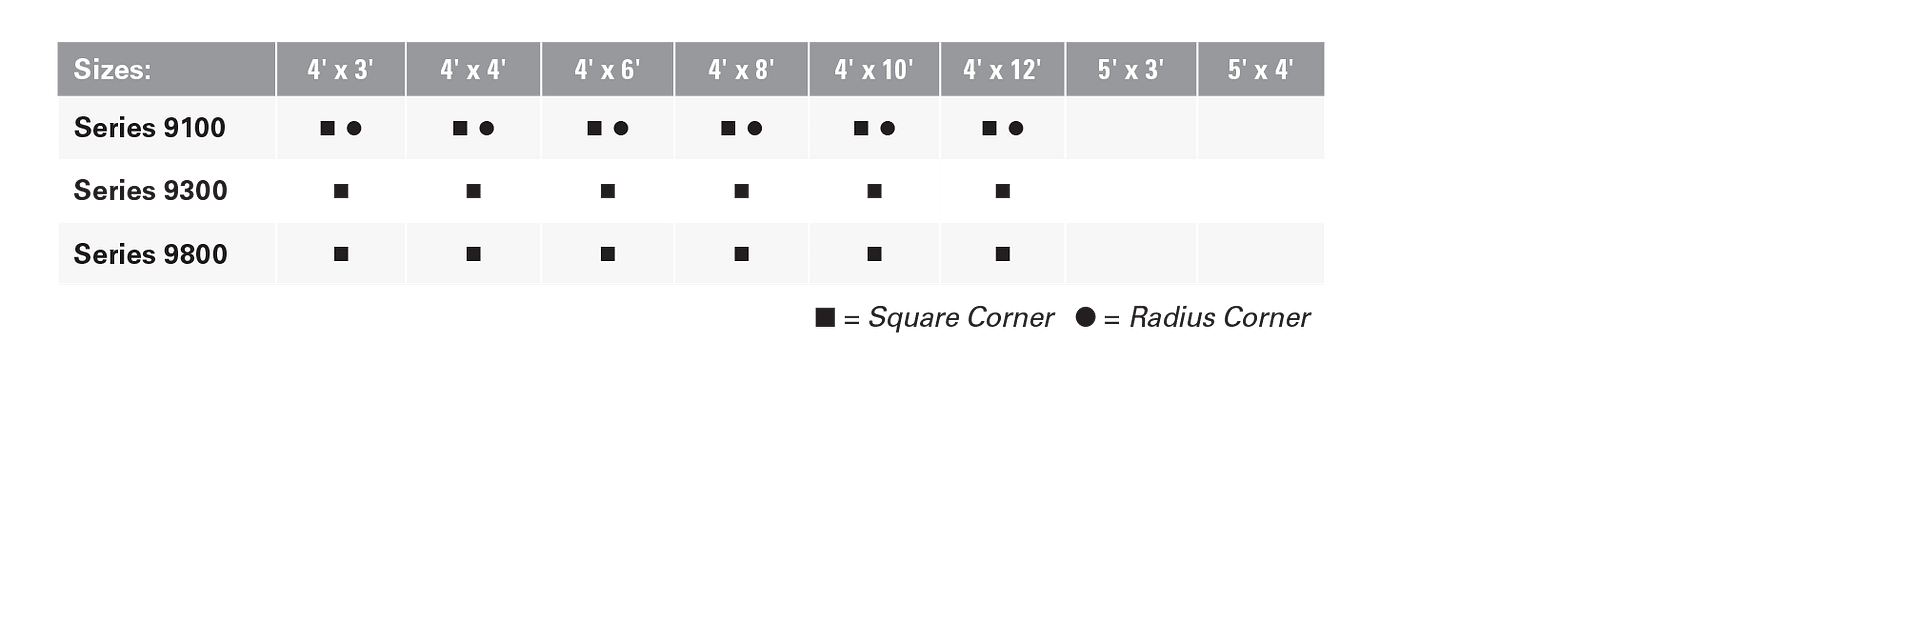 Standard Size Options Table